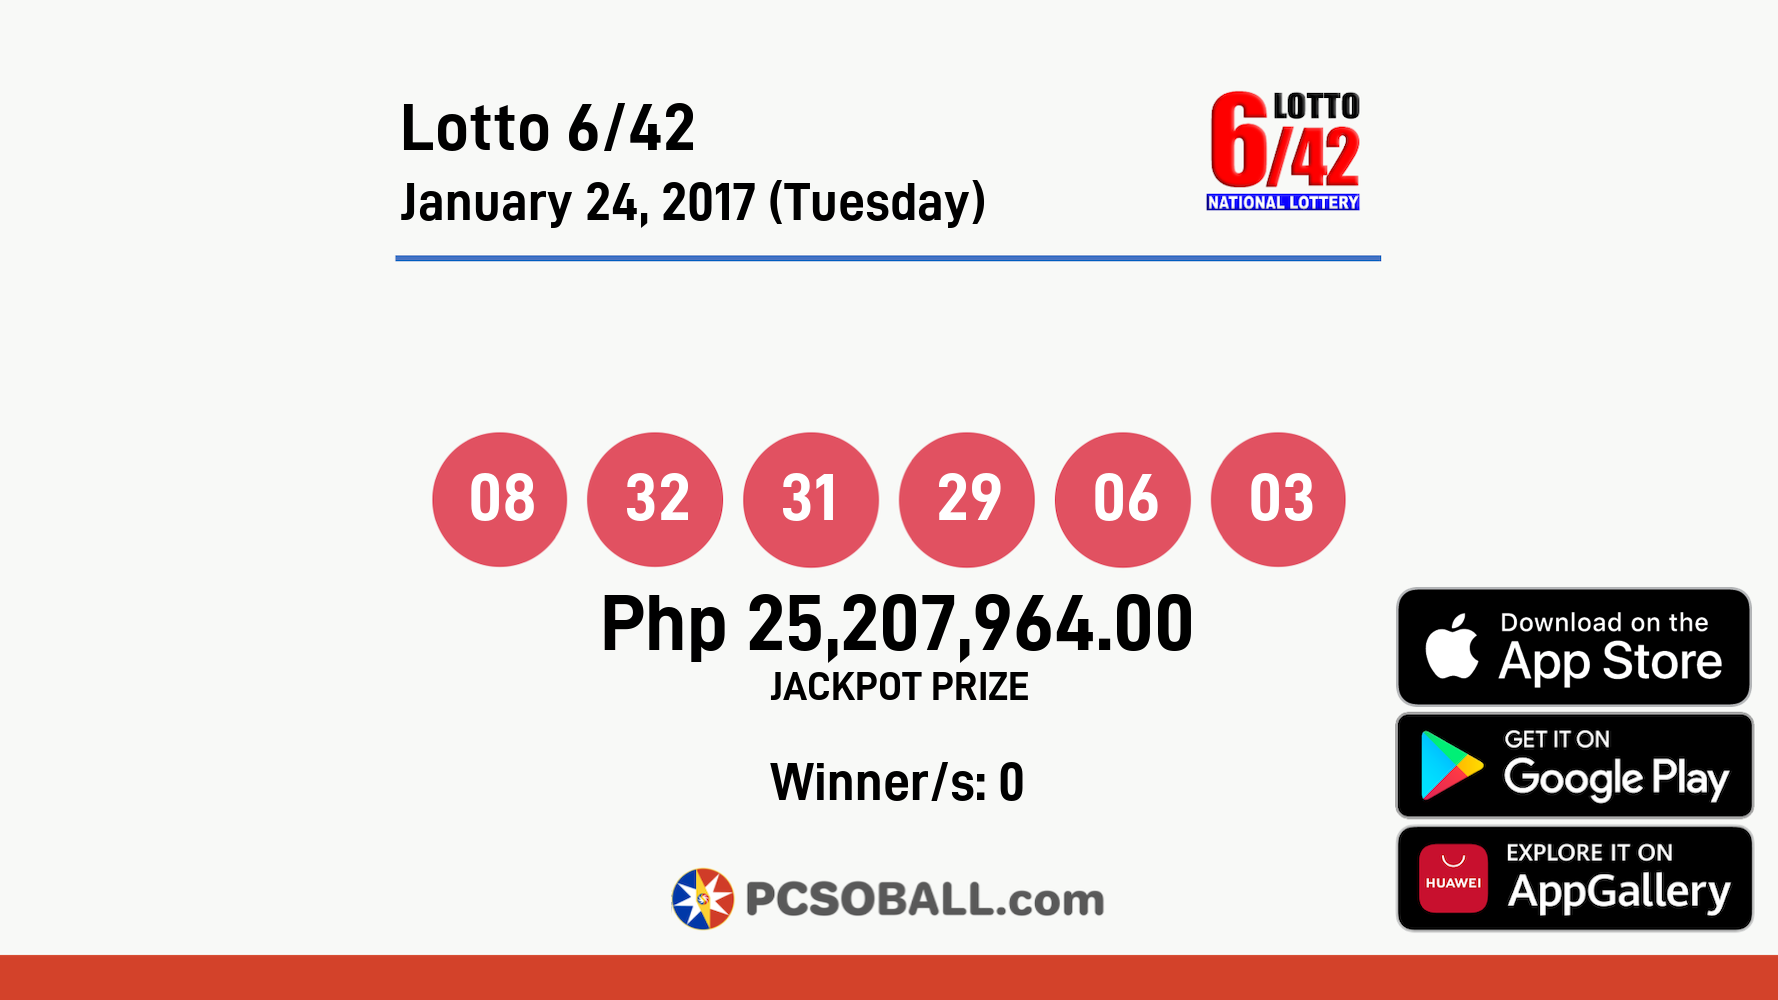 Lotto 6/42 January 24, 2017 (Tuesday) Result